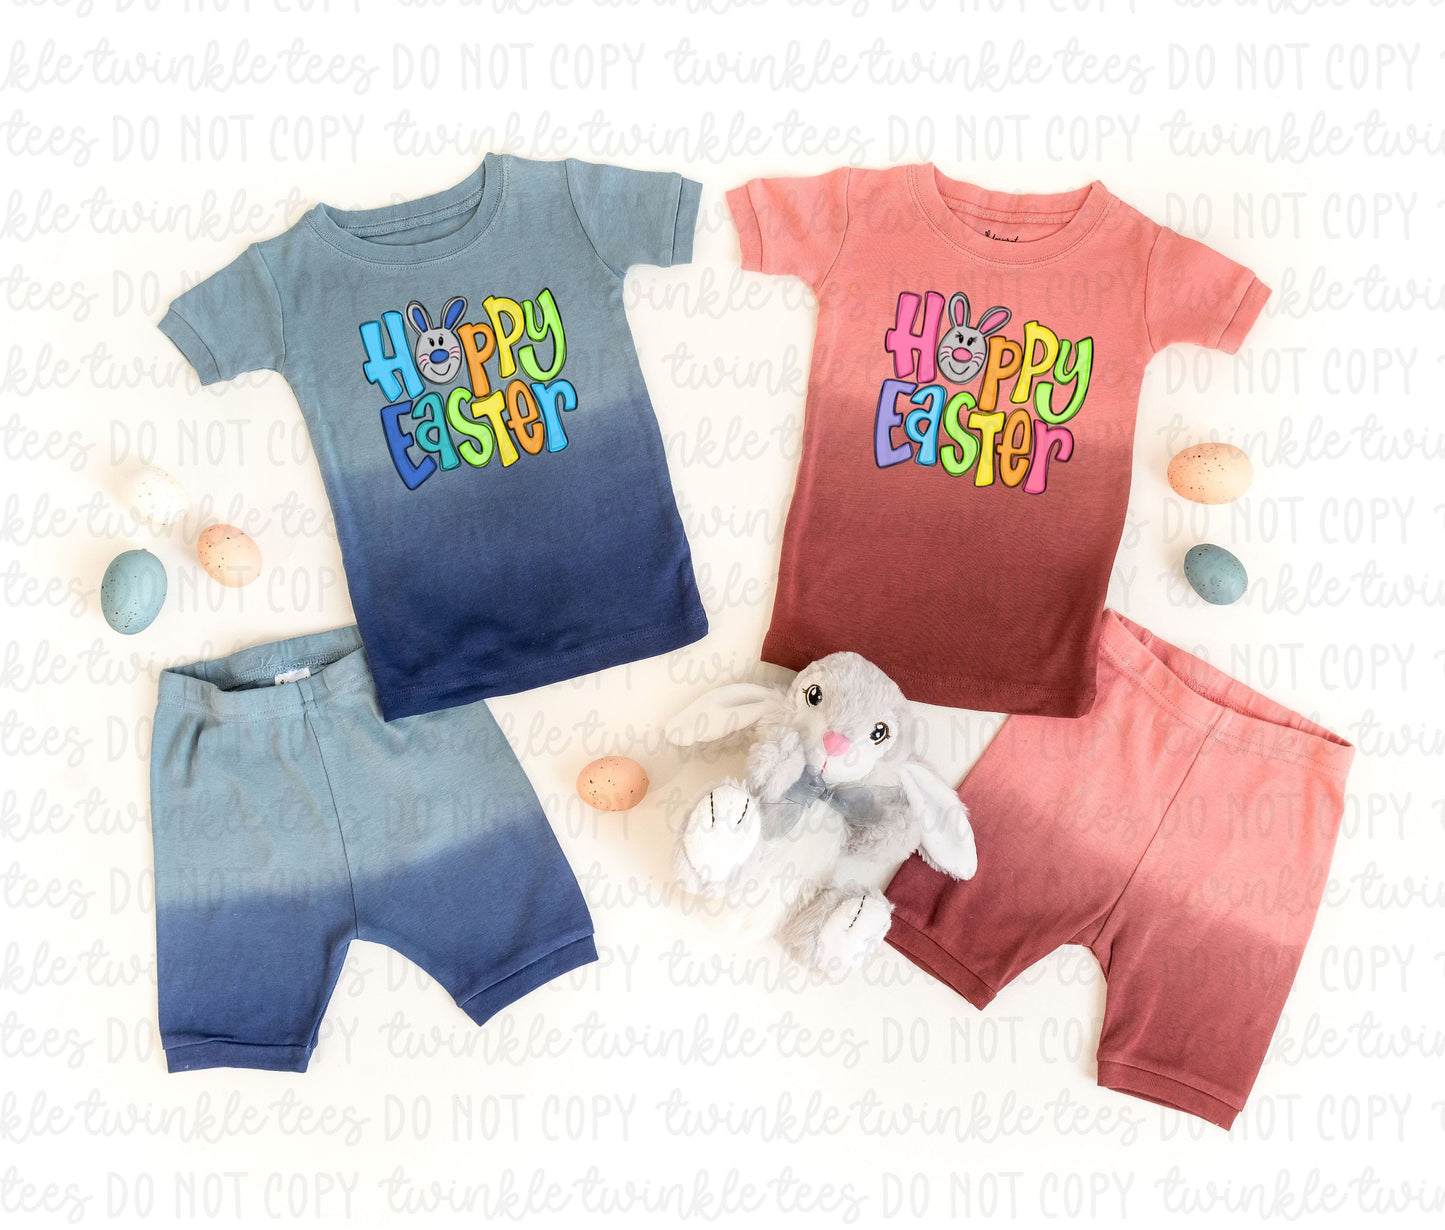 Happy Easter Pink and Blue Ombre Shorts Pajamas, tie dye easter pajamas